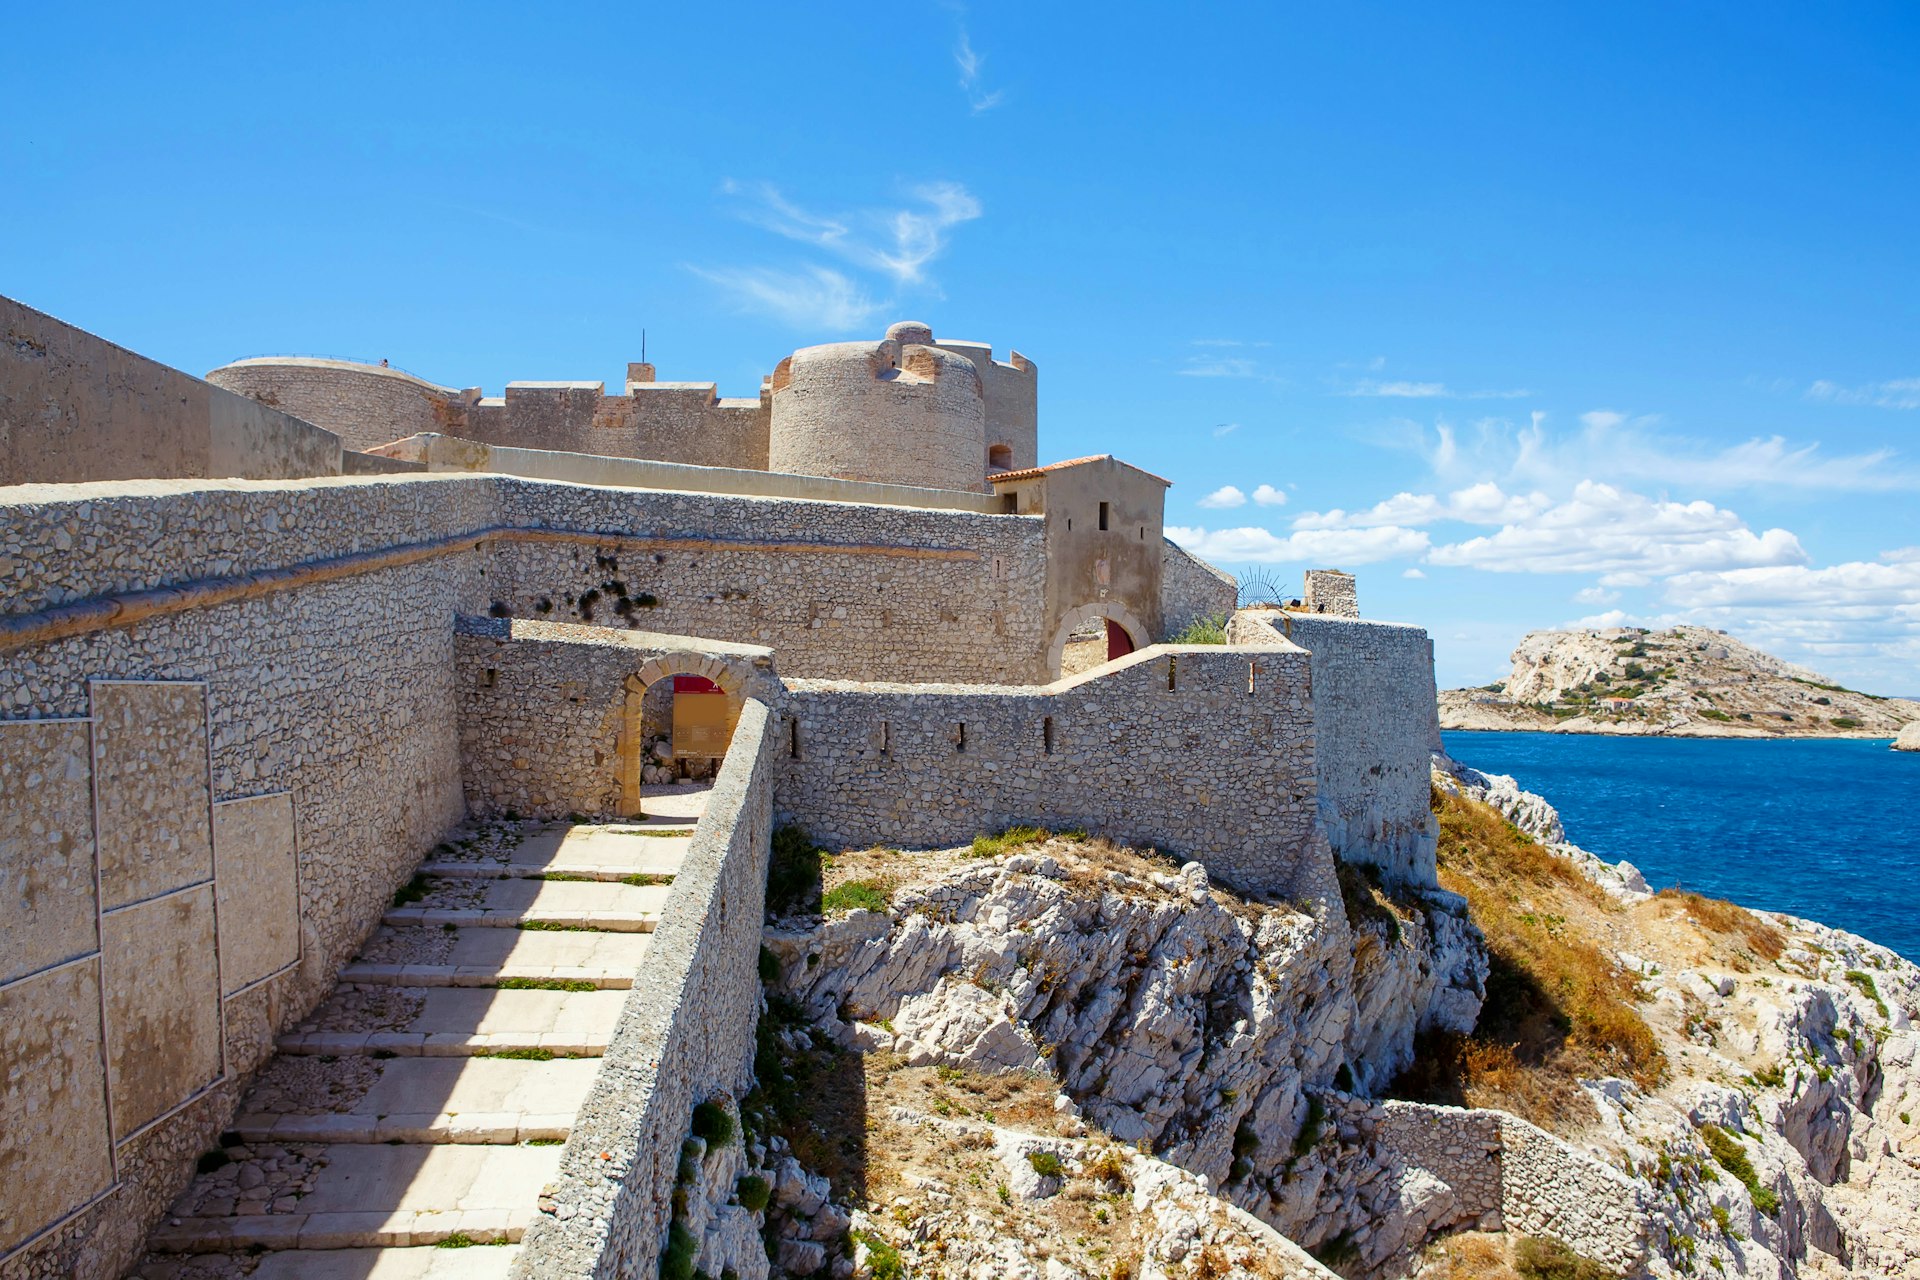 Castle Chateau d'If is one of the many sites you can discover in Marseille on a guided tour 